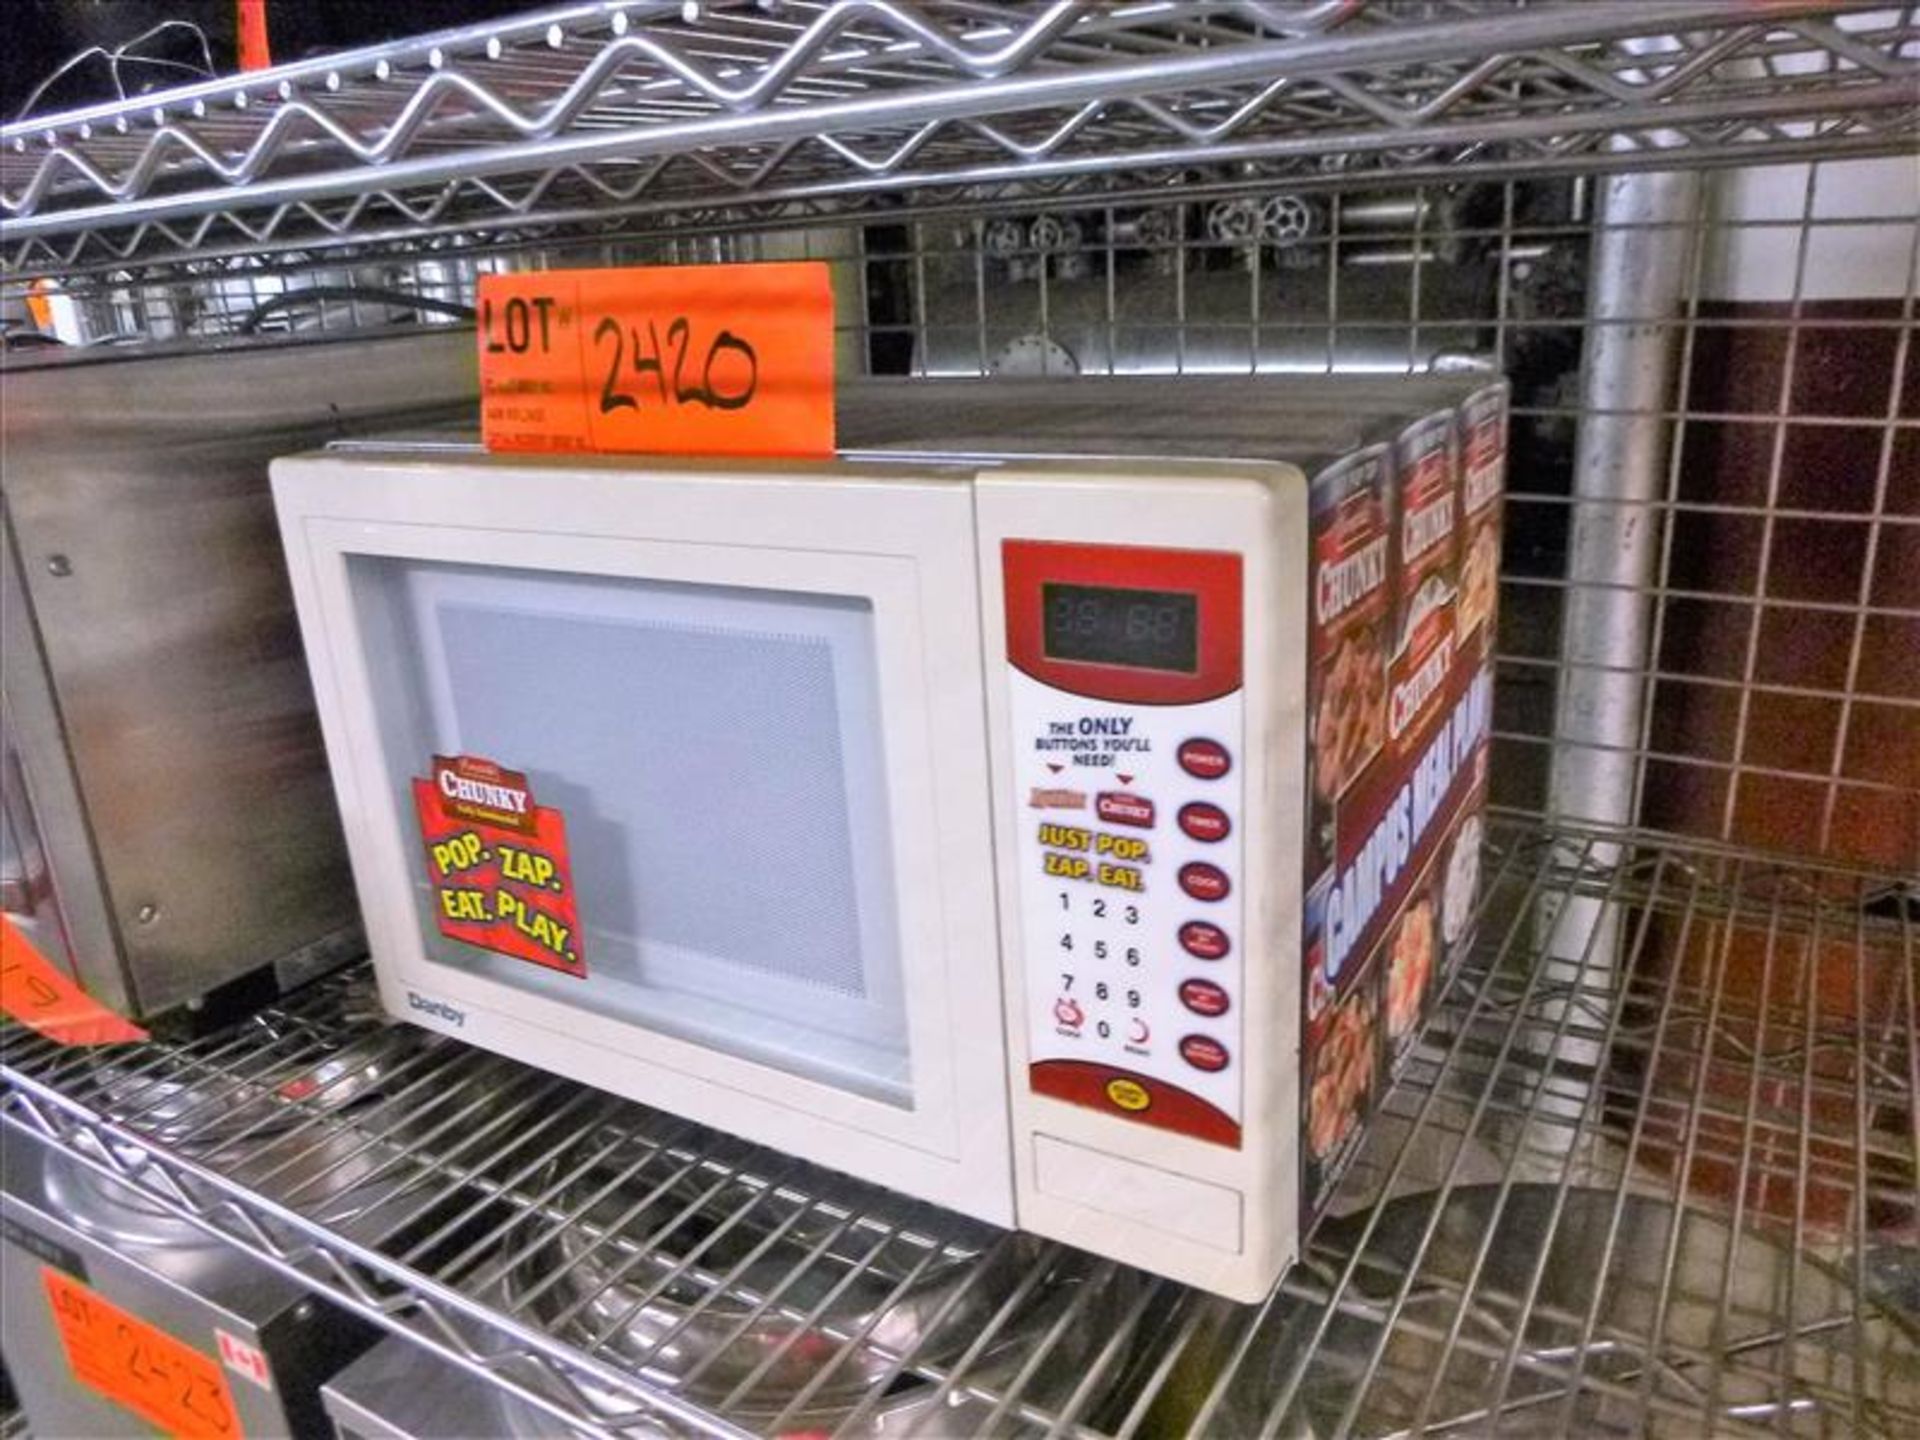 Danby "Chunky Soup" edition microwave [Kitchen Cage, 1st Floor]